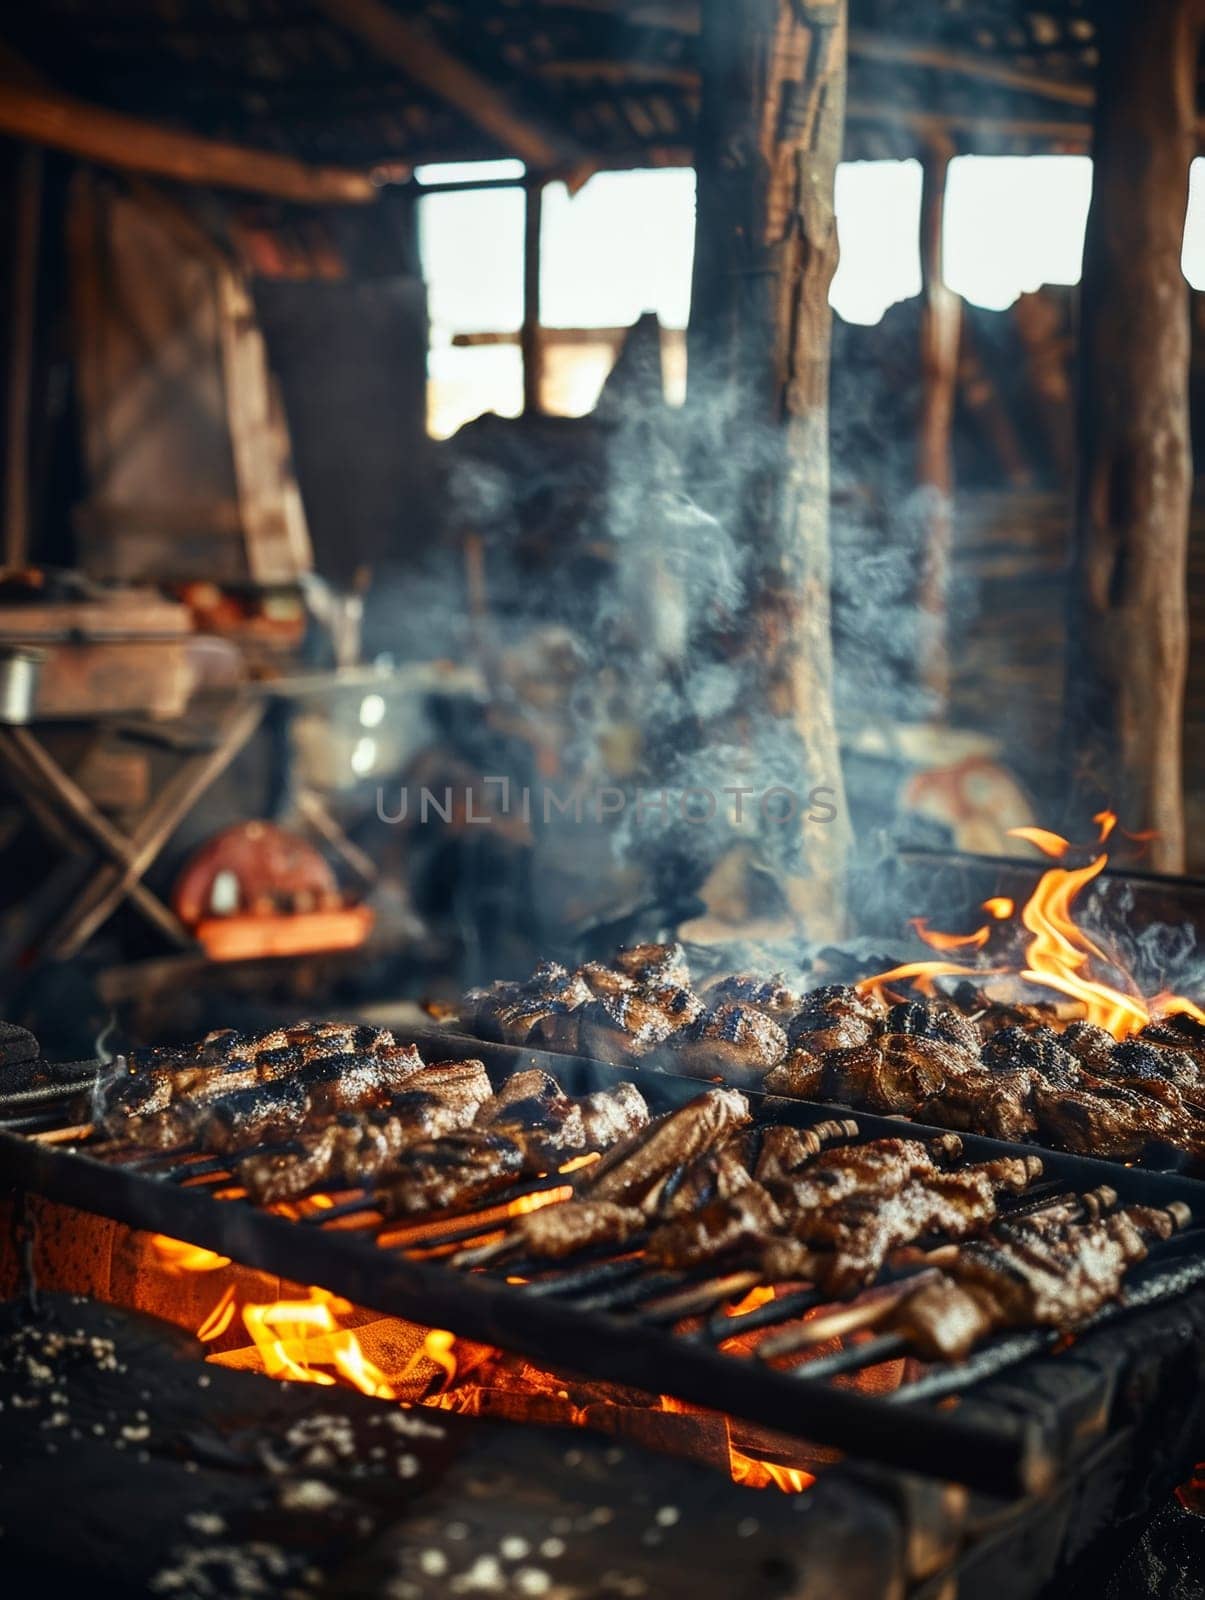 Kapana, a traditional Namibian dish of grilled, spiced meat typically sold in open-air markets. This flavorful and smoky street food represents the vibrant culinary culture of Africa